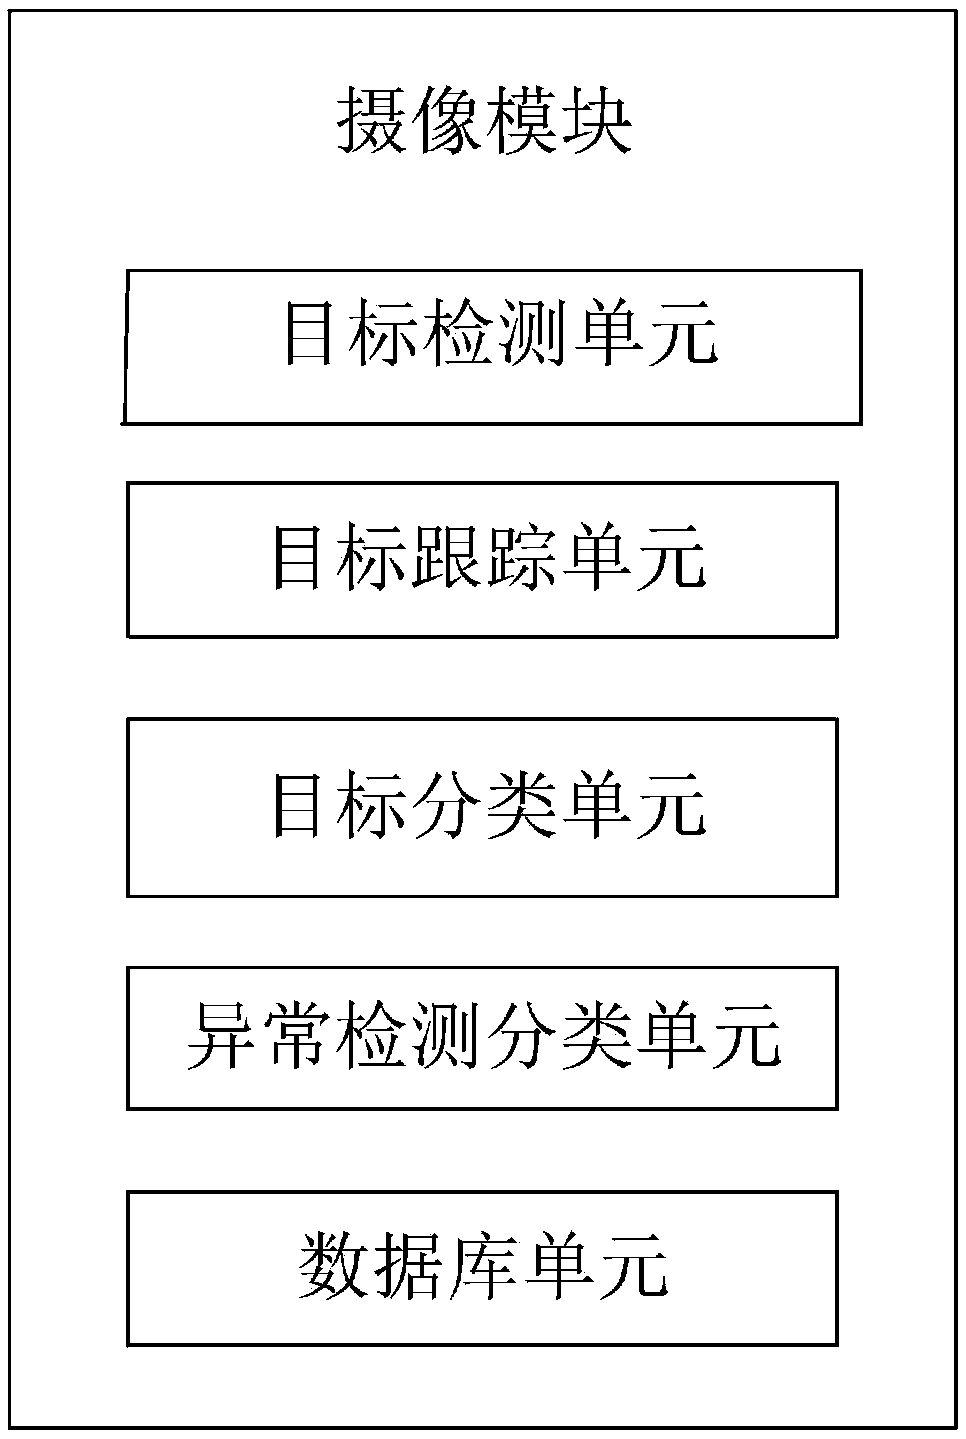 Automatically recognized running path planning method for electromobile based on operation of computer